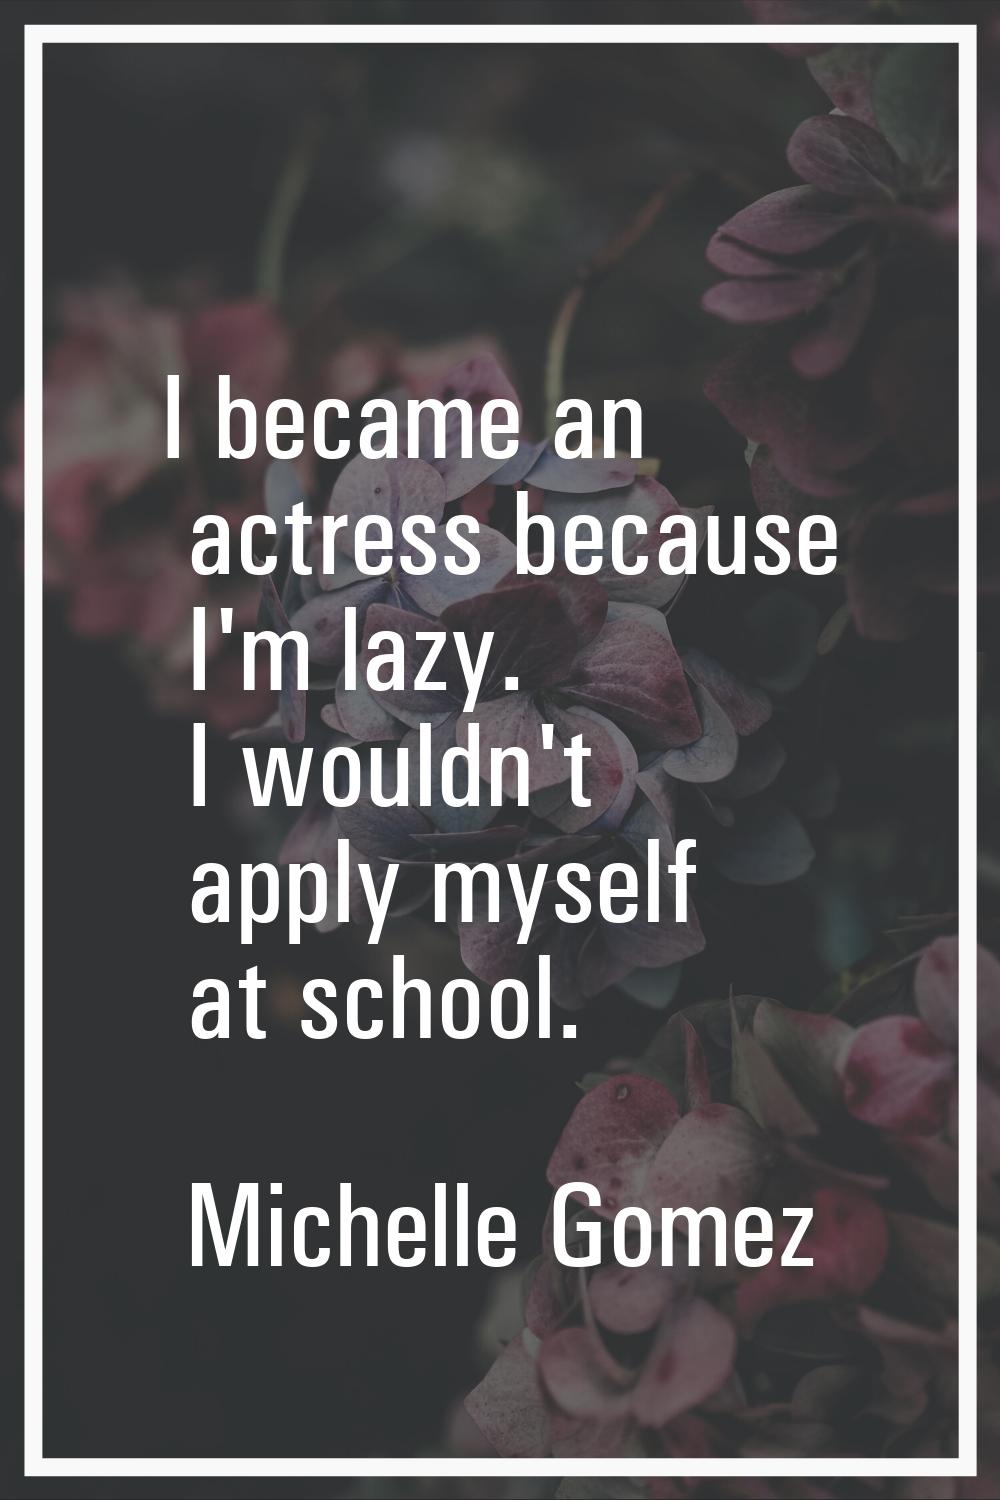 I became an actress because I'm lazy. I wouldn't apply myself at school.